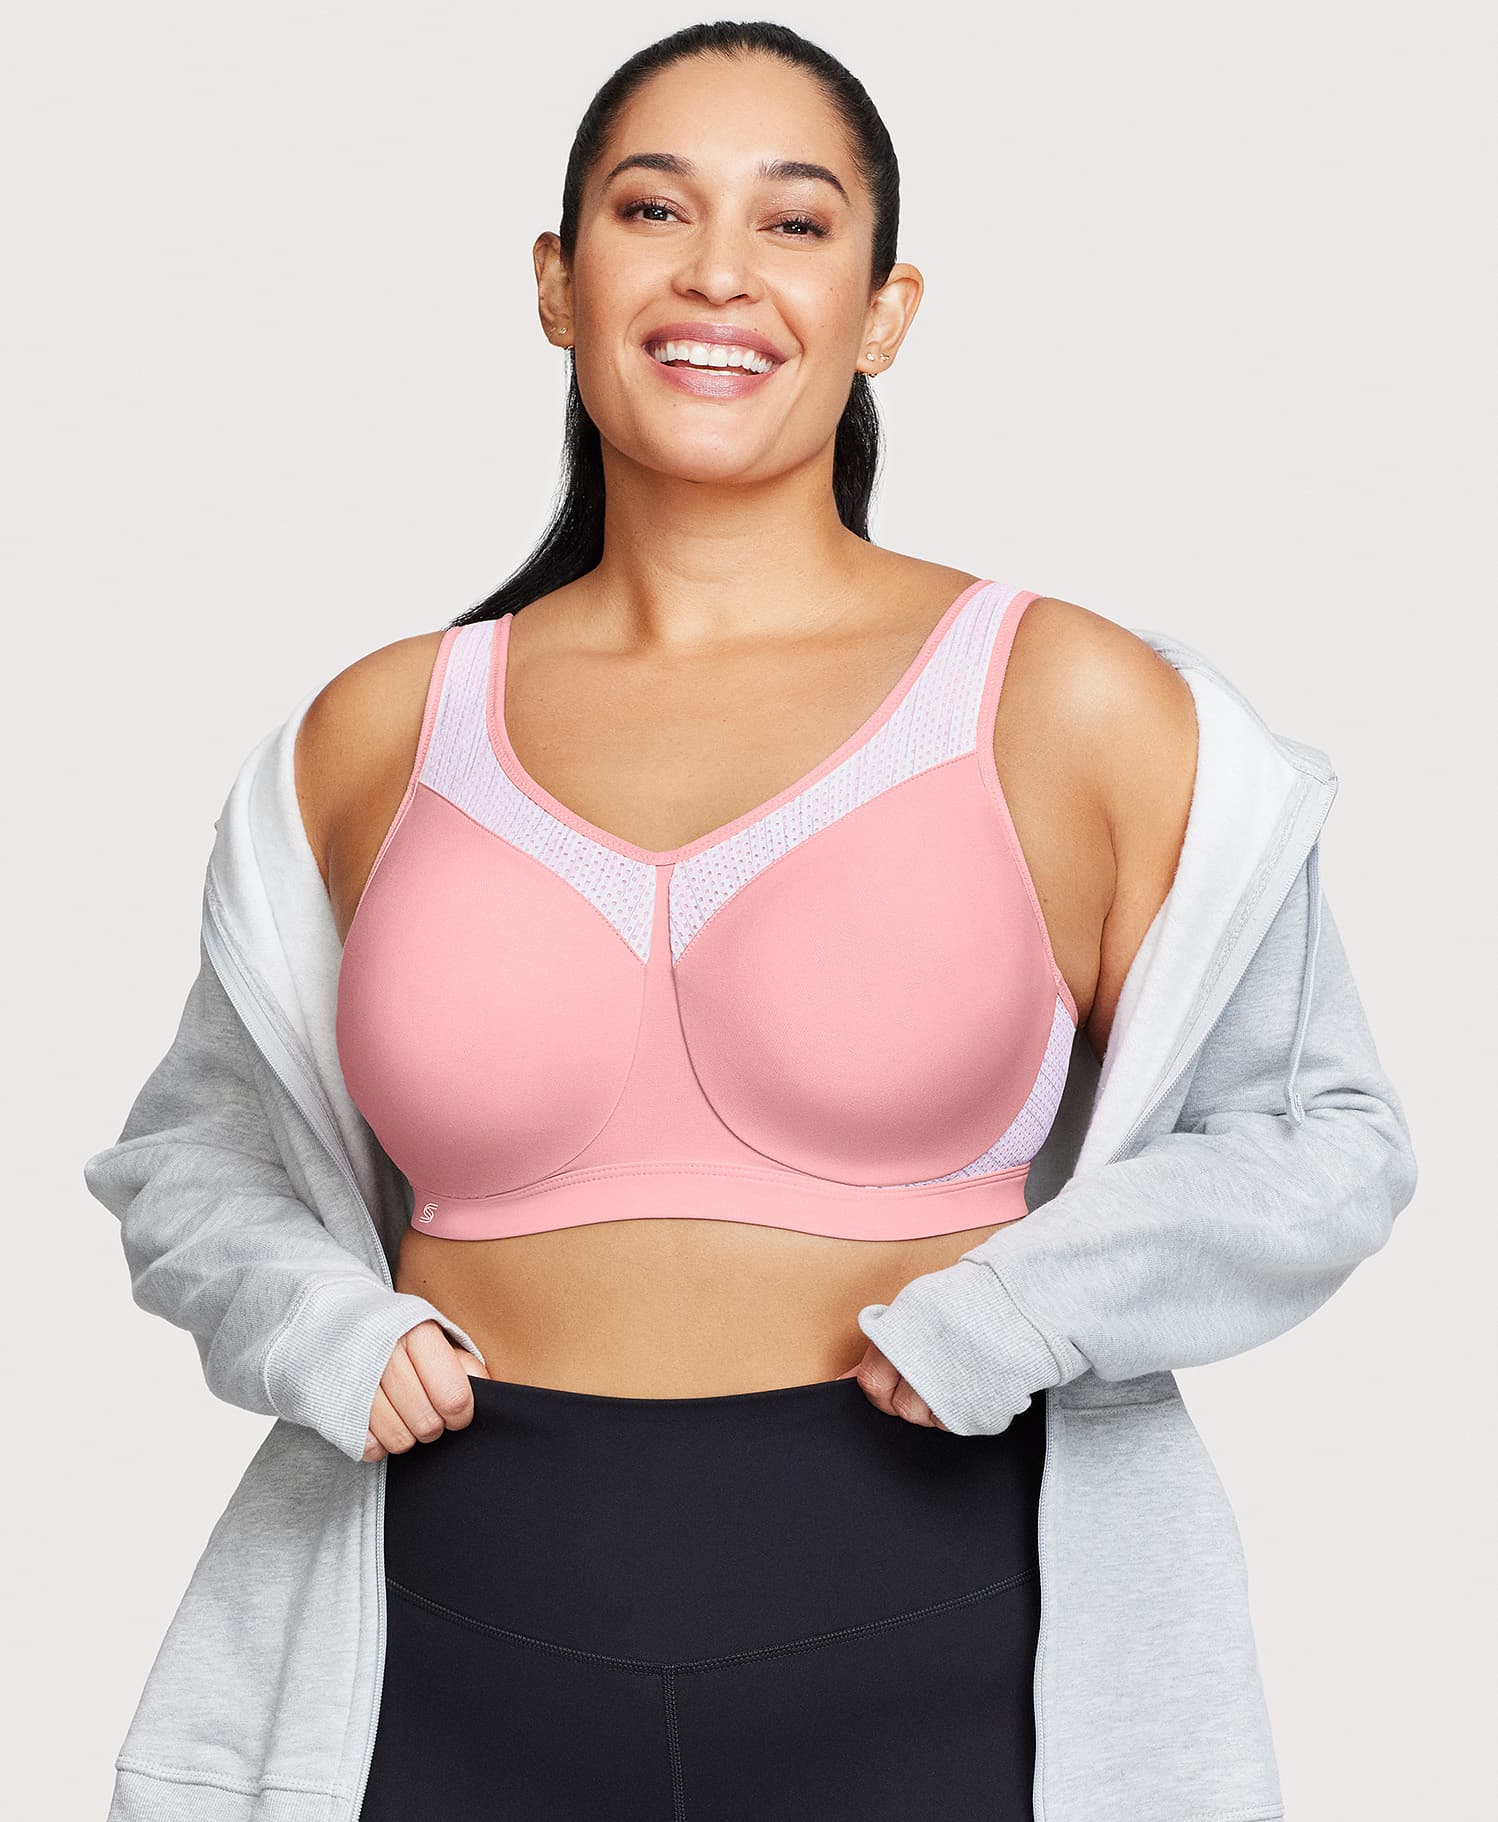 Plus Size Large Cup Bras: Cups F To K